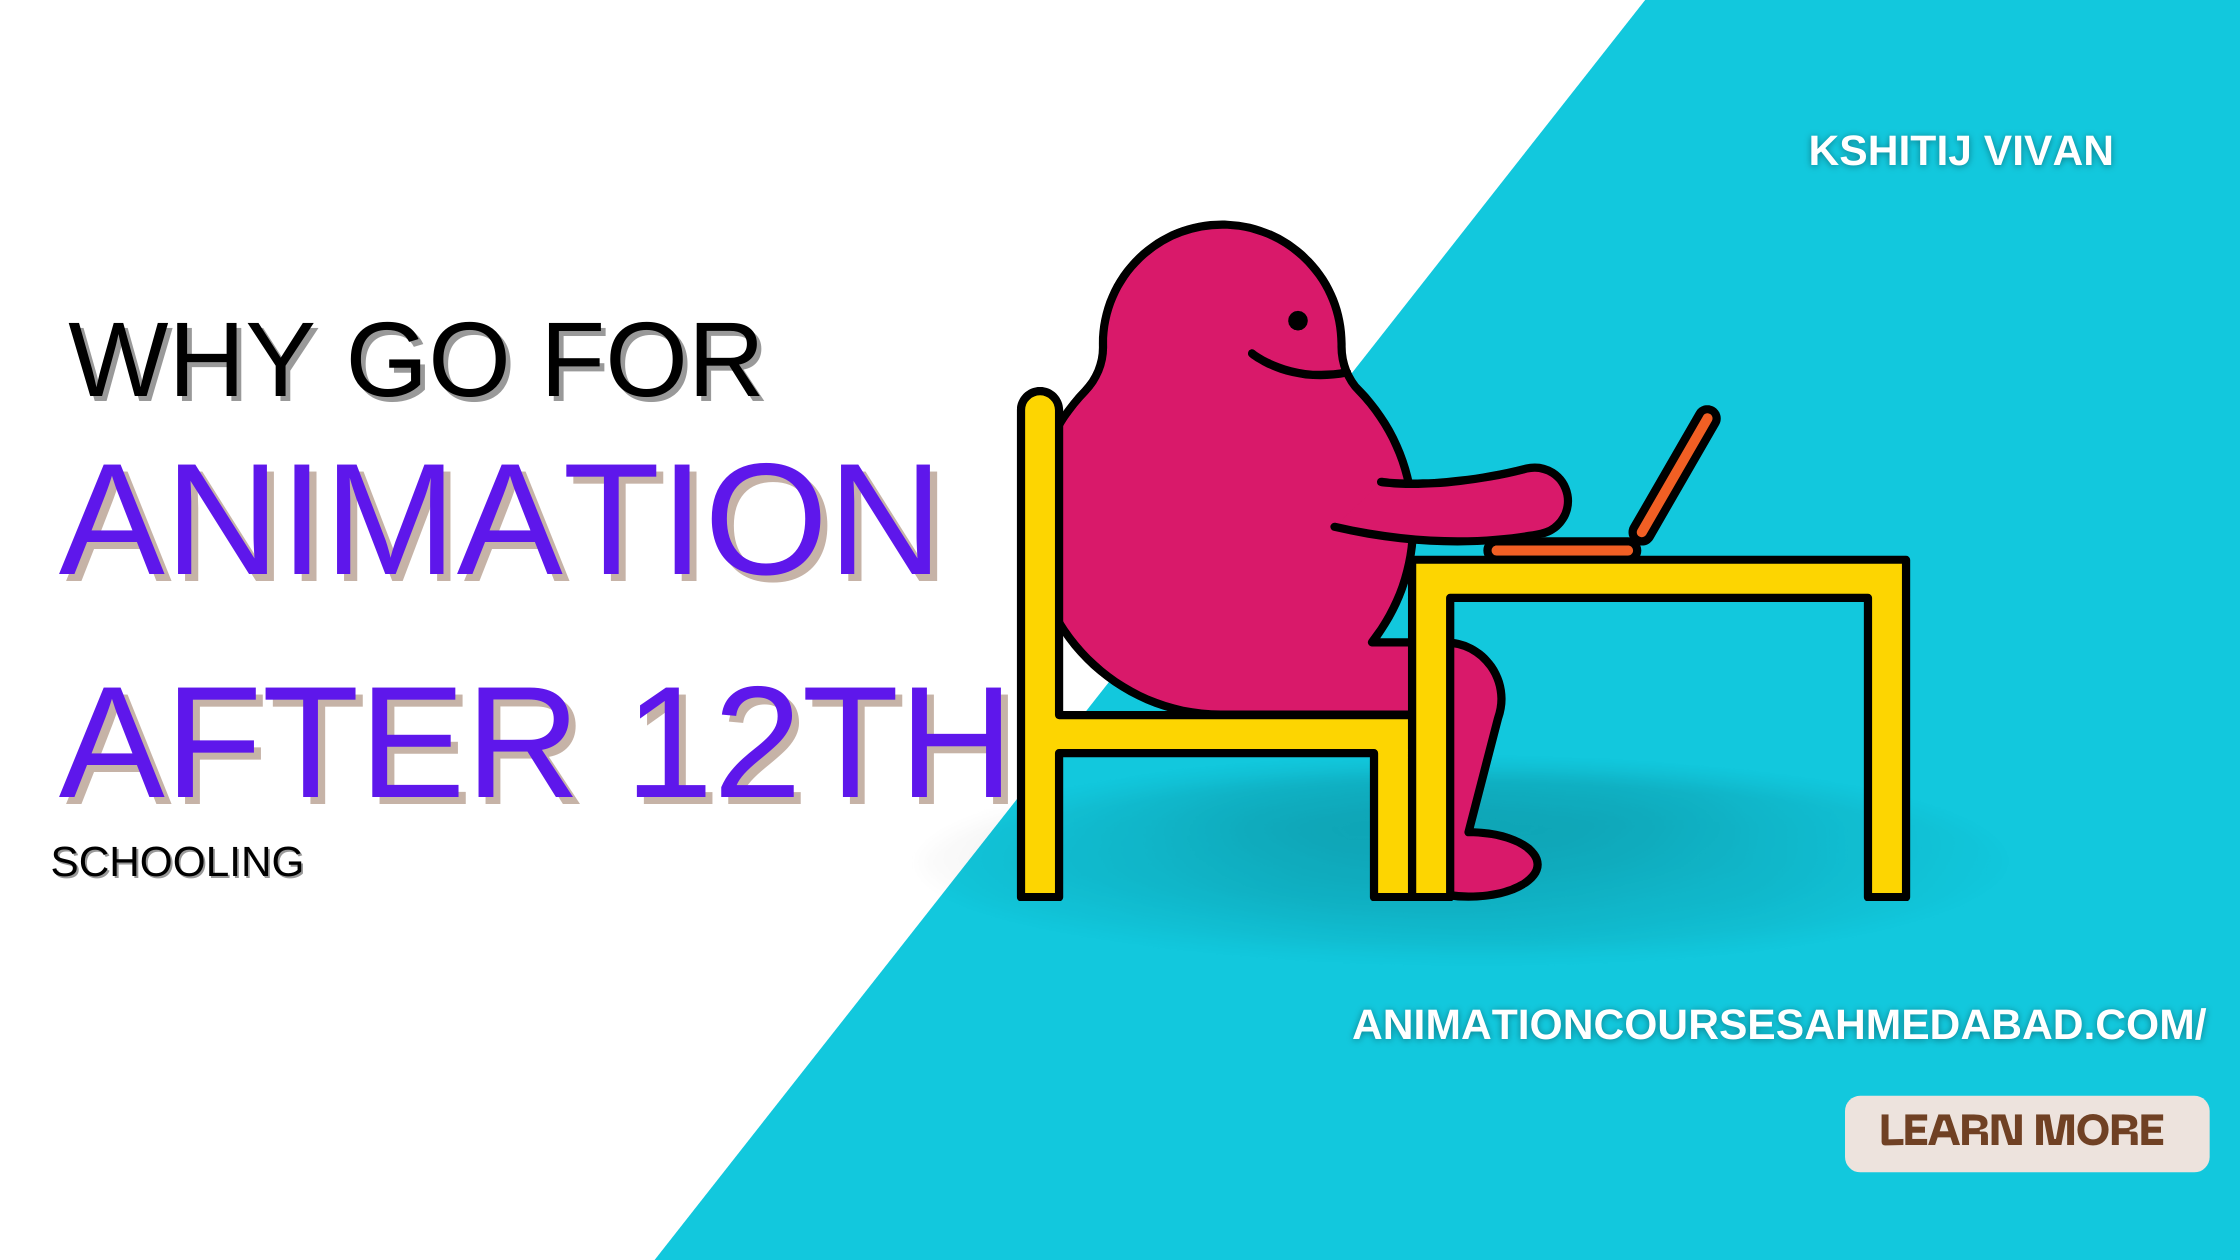 7 Reasons To Take An Animation Course After 12th